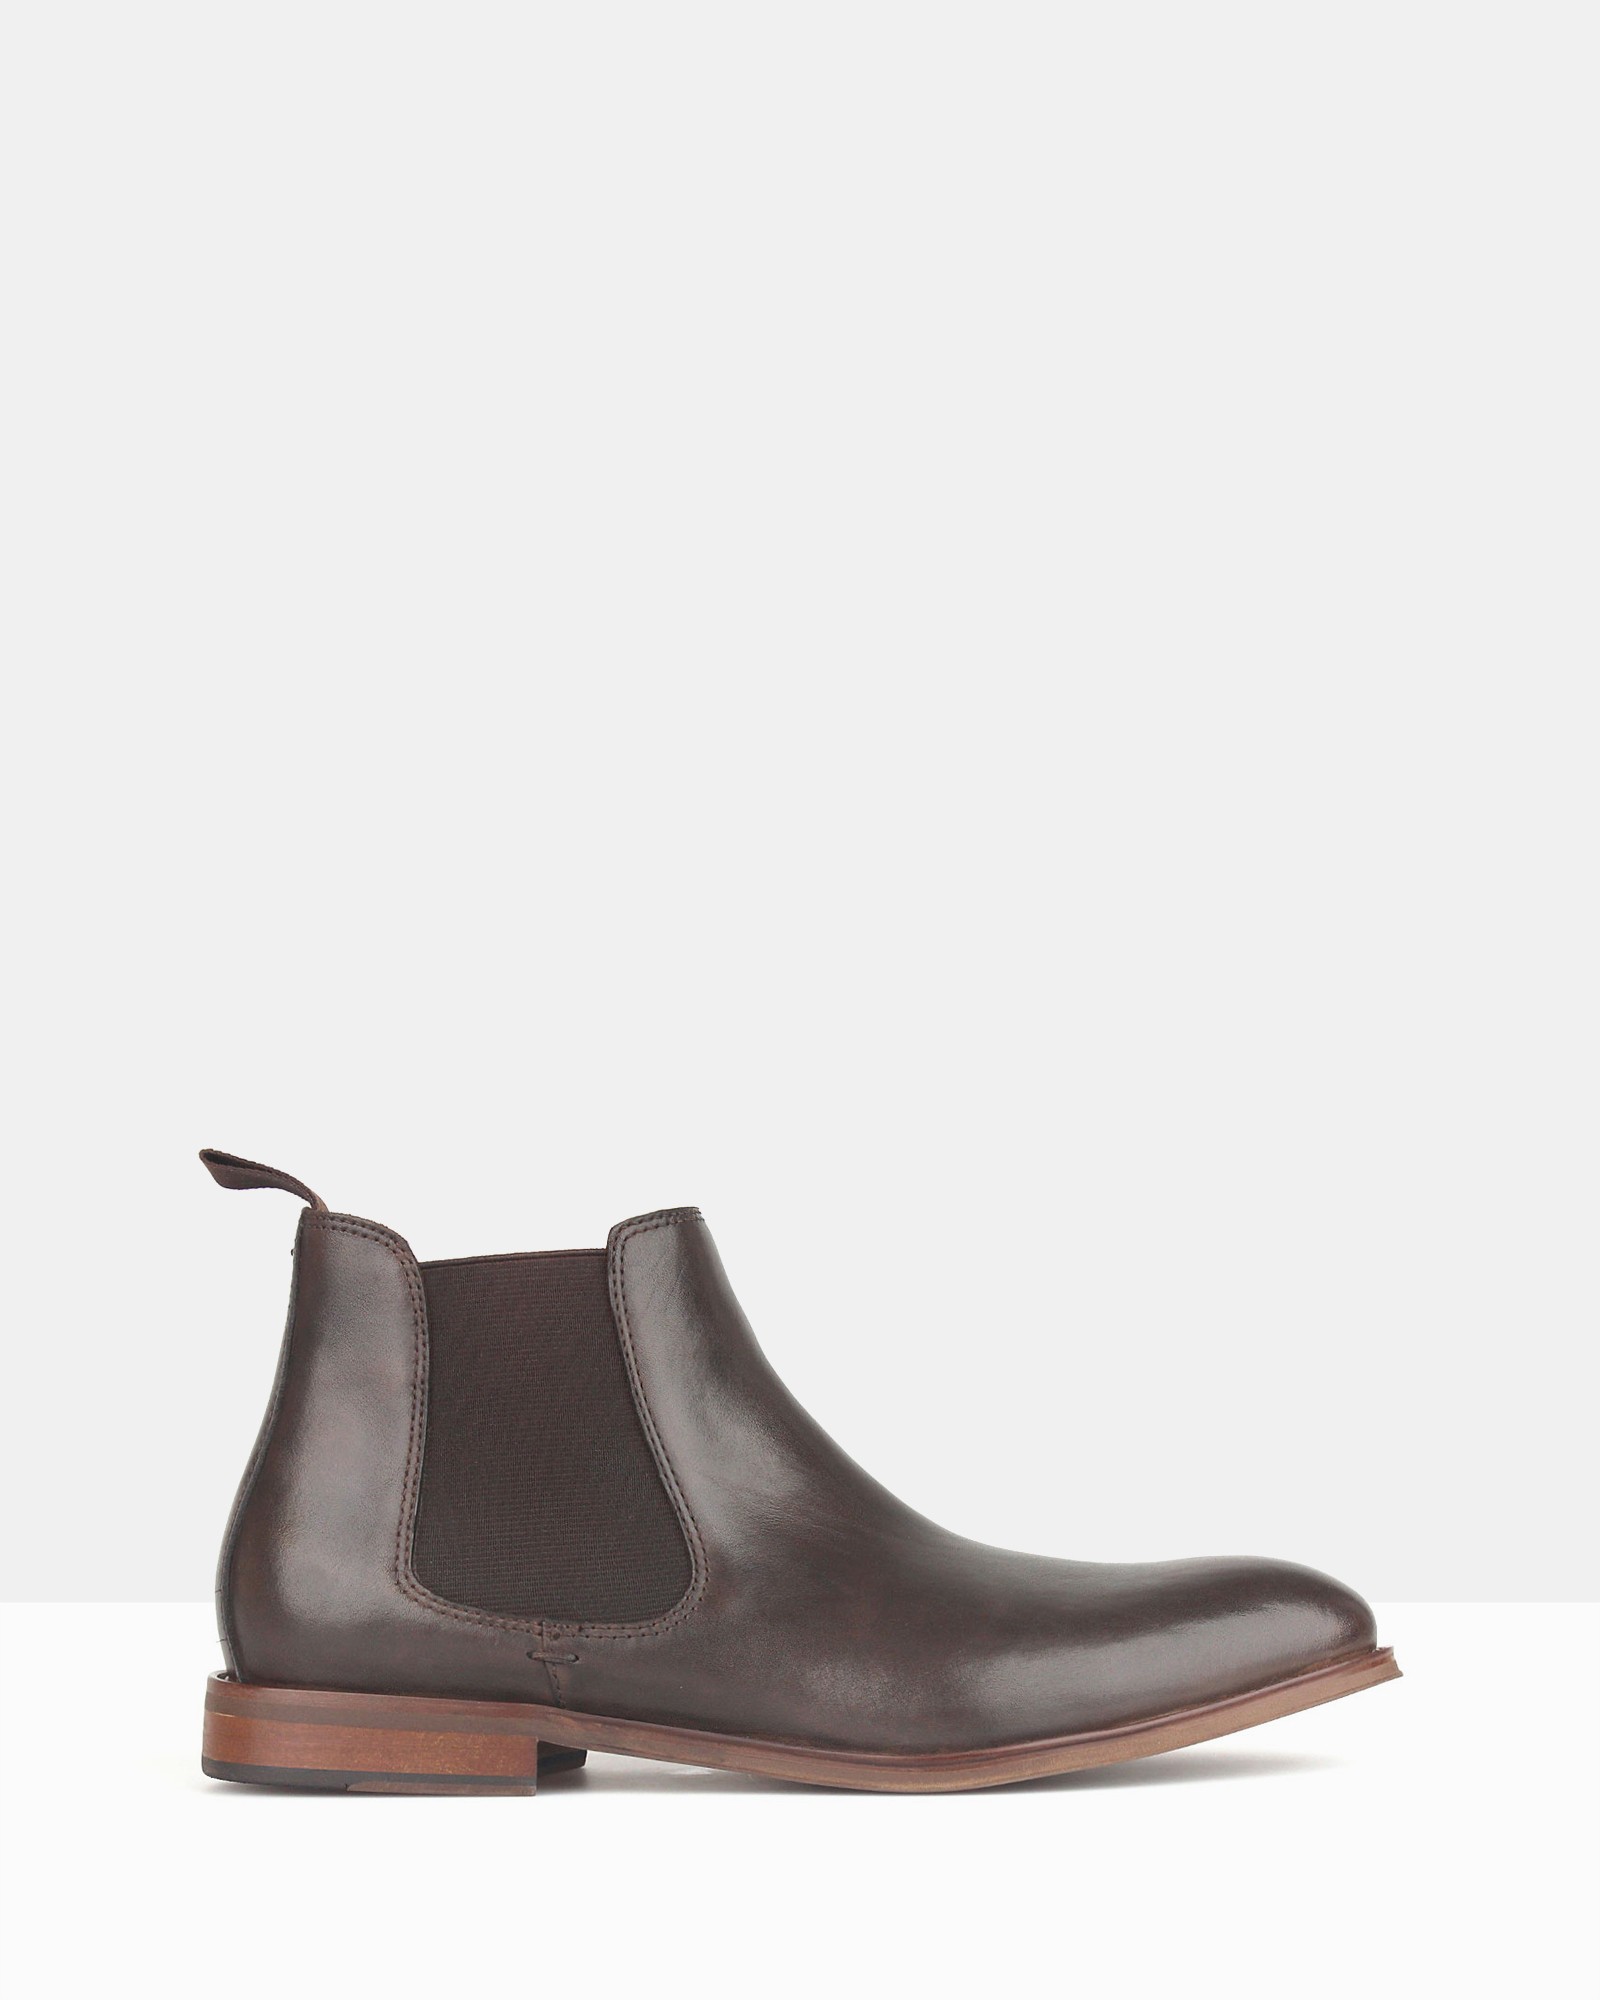 Wildfire Leather Chelsea Boots Dark Brown by Zu | ShoeSales